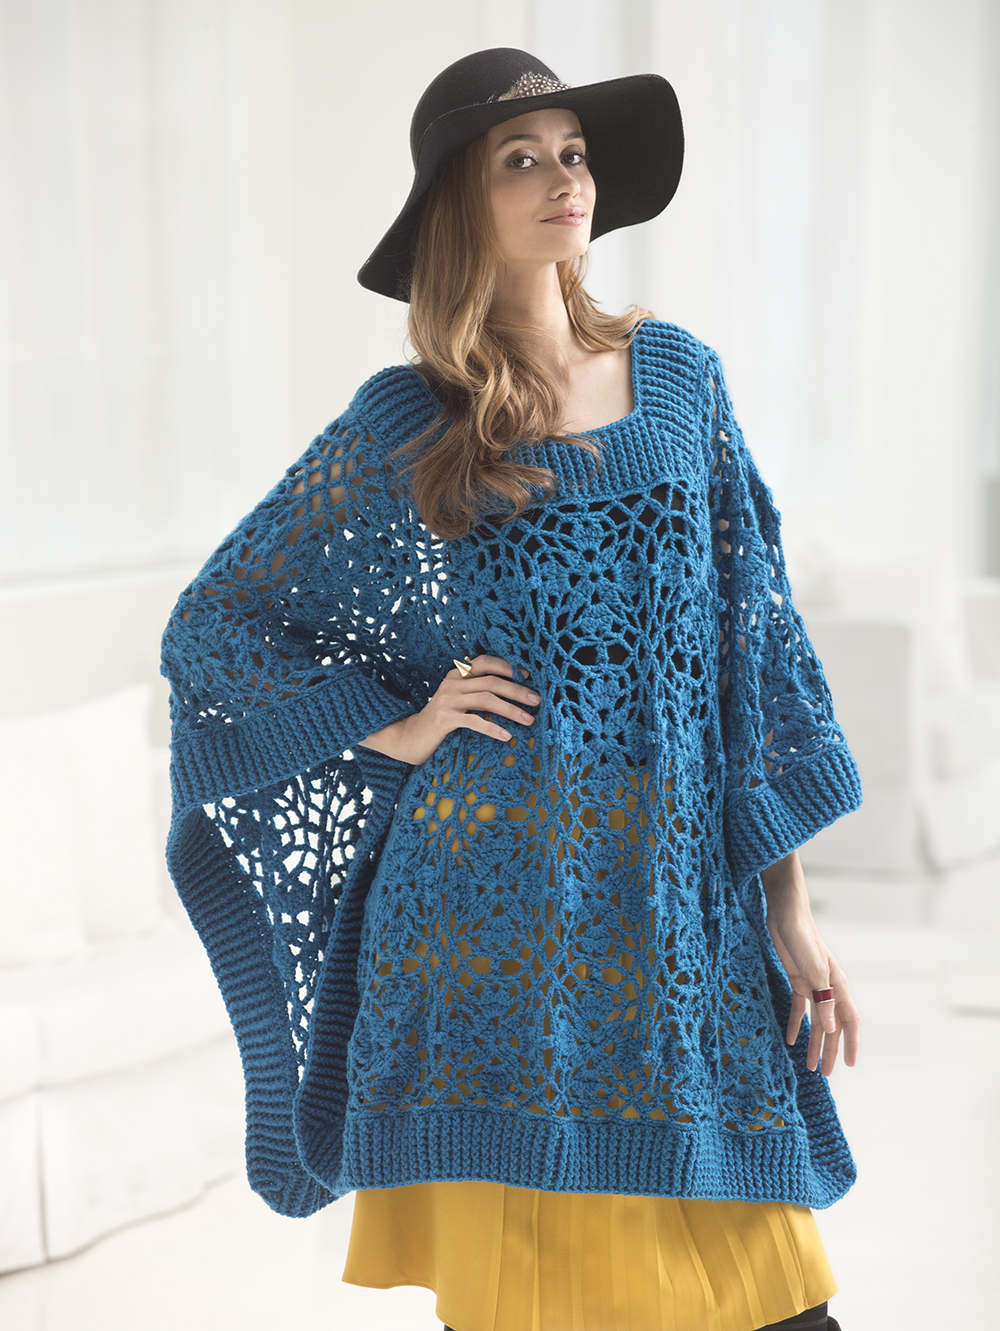 Free Crochet Lace Cardigan Pattern Our Favorite Crochet Sweater Kits For Mom And Ba